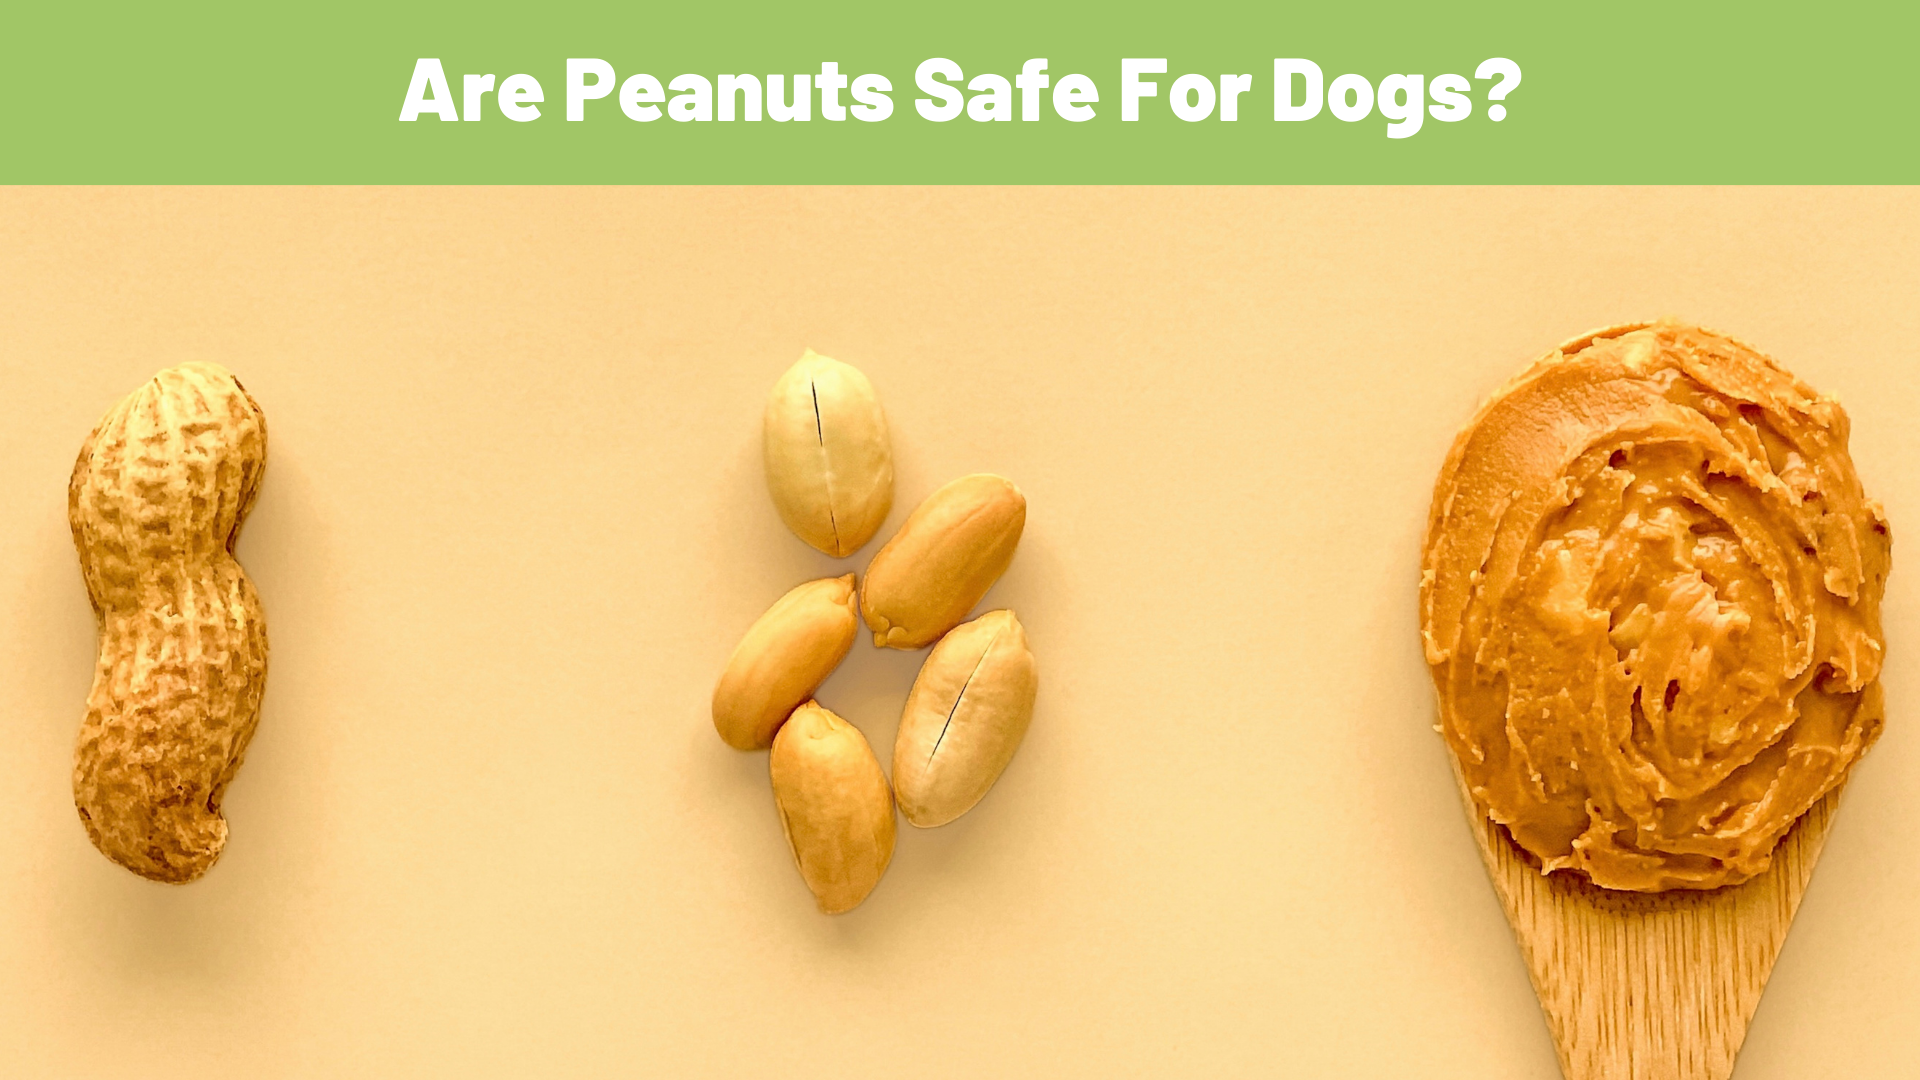 Are Peanuts Safe for Your Furry Friend? - RawOrigins.pet - The Raw Dog Food Company